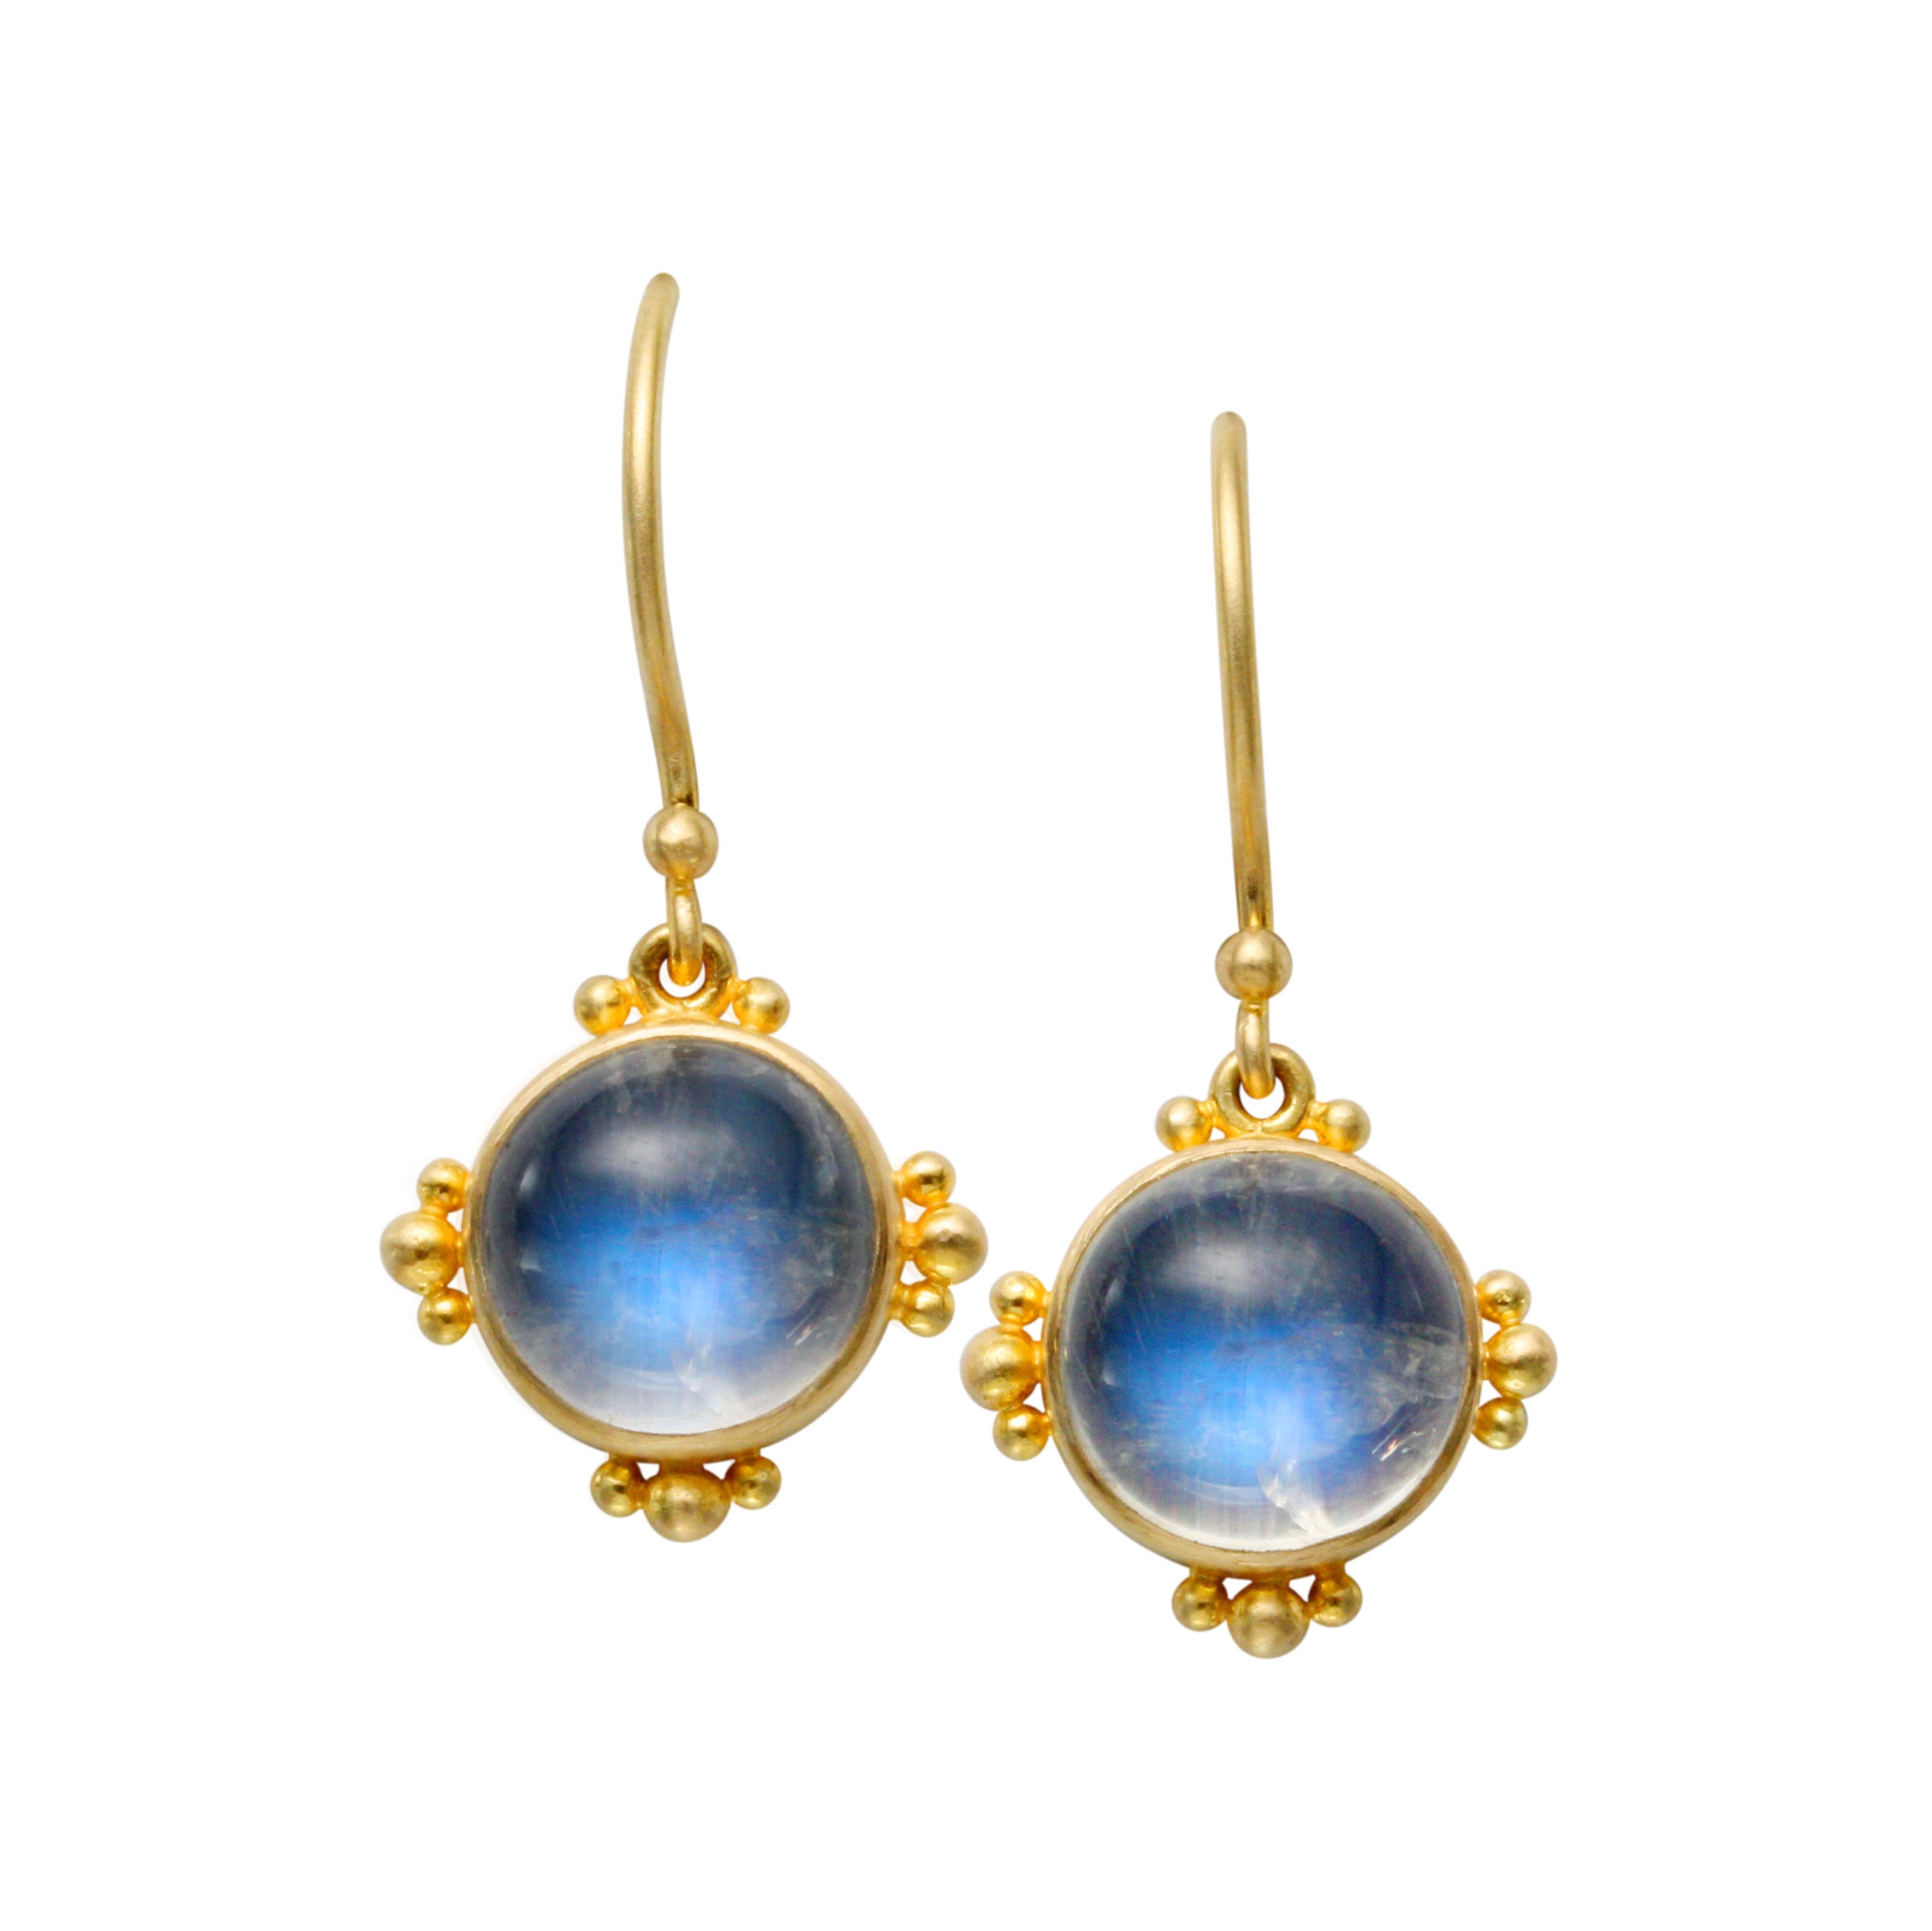 Steven Battelle 3.7 Carats Rainbow Moonstone 18K Wire Earrings In New Condition For Sale In Soquel, CA